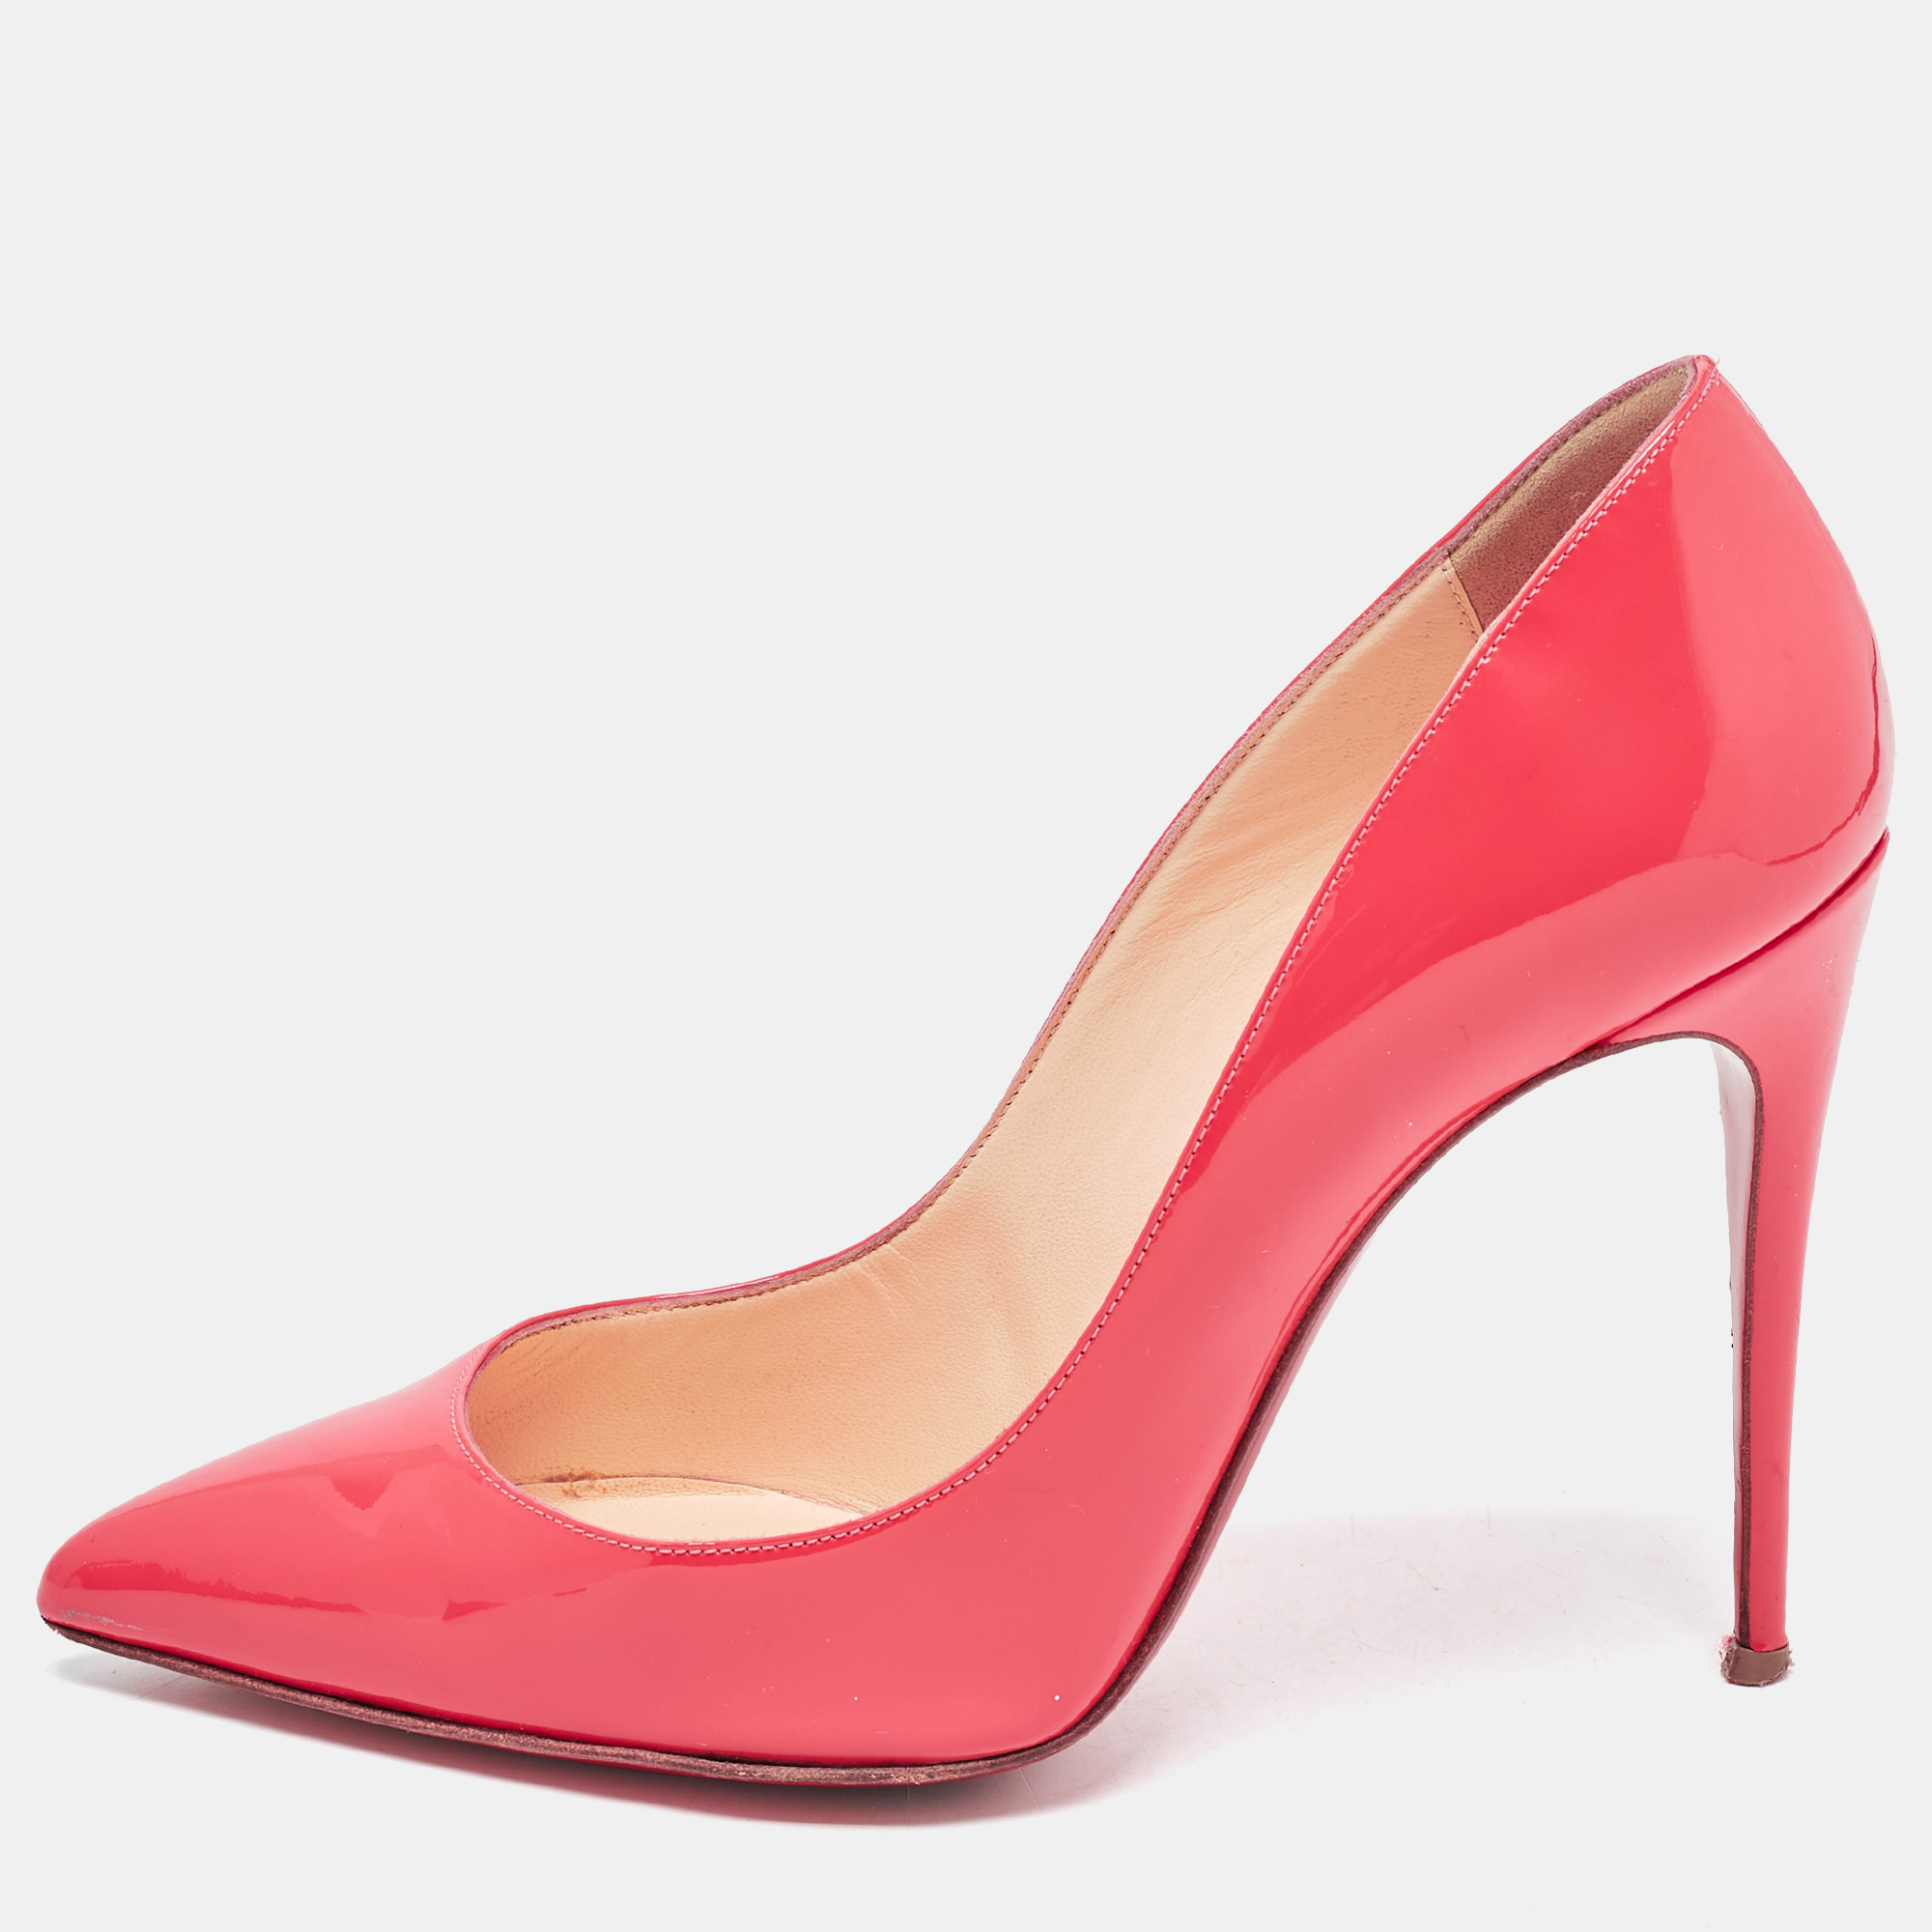 Christian Louboutin Pink Patent Leather Pigalle Follies Pumps Size 37